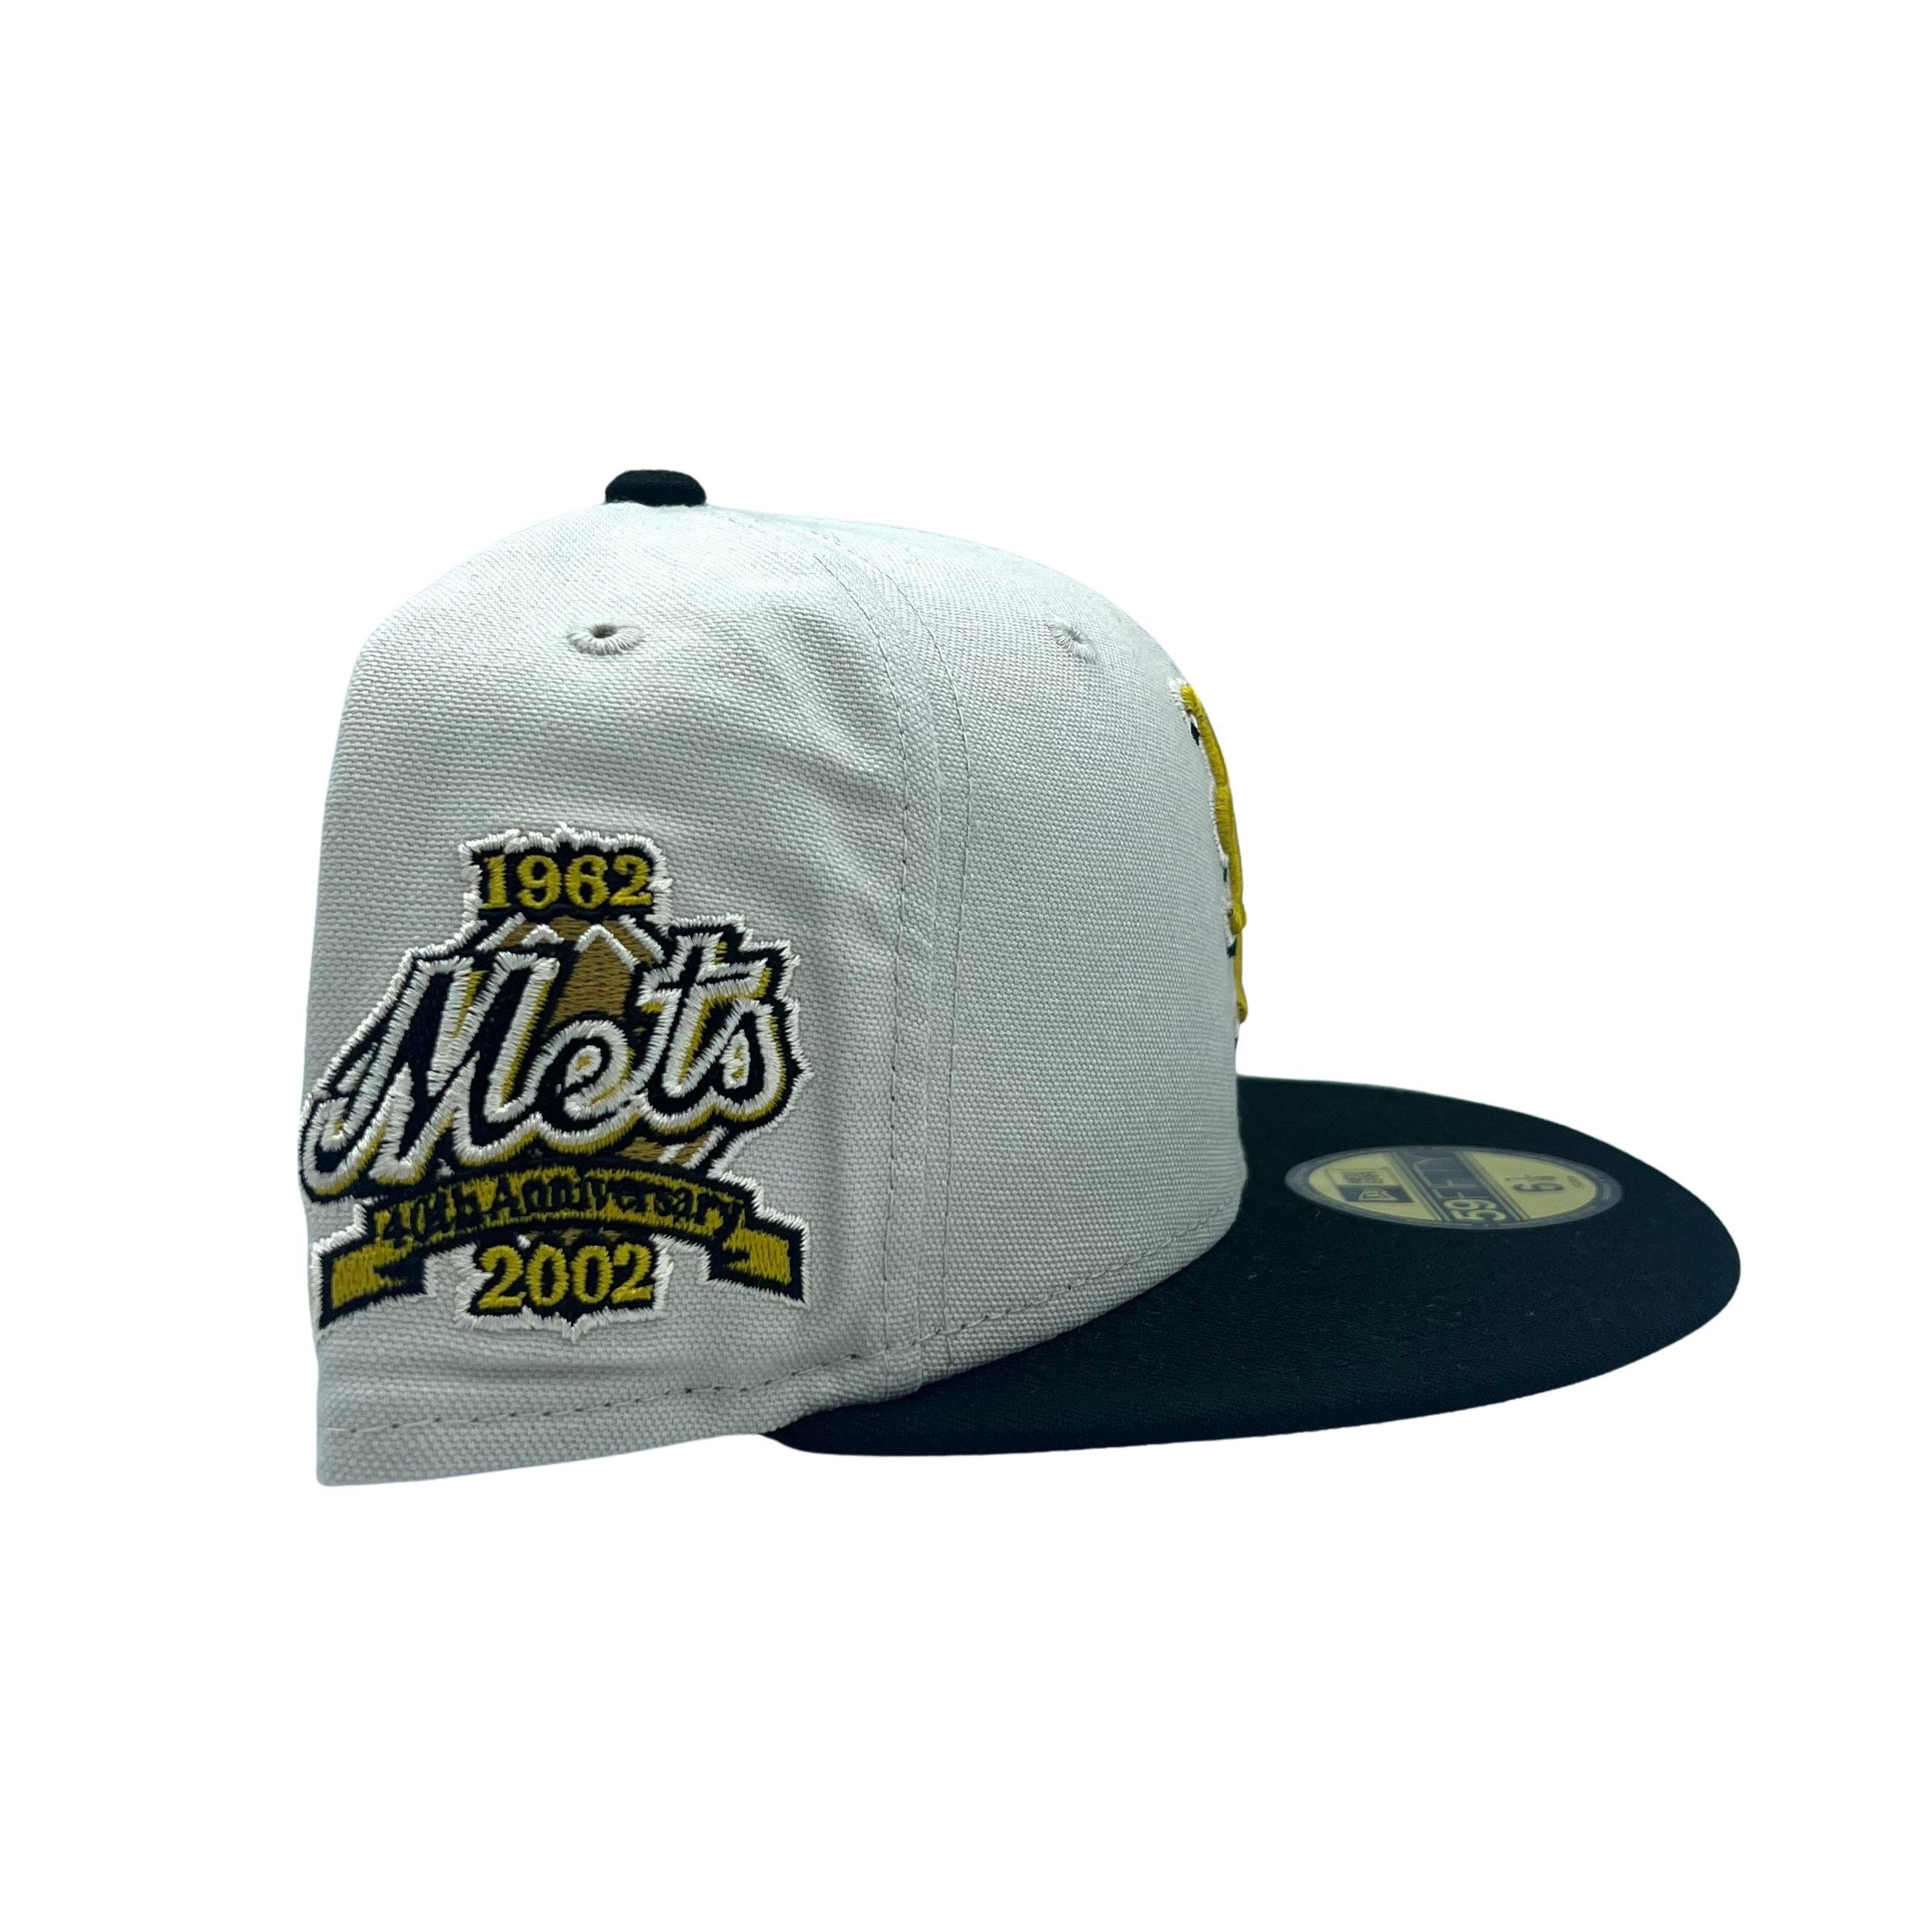 New York Mets Fitted Cap